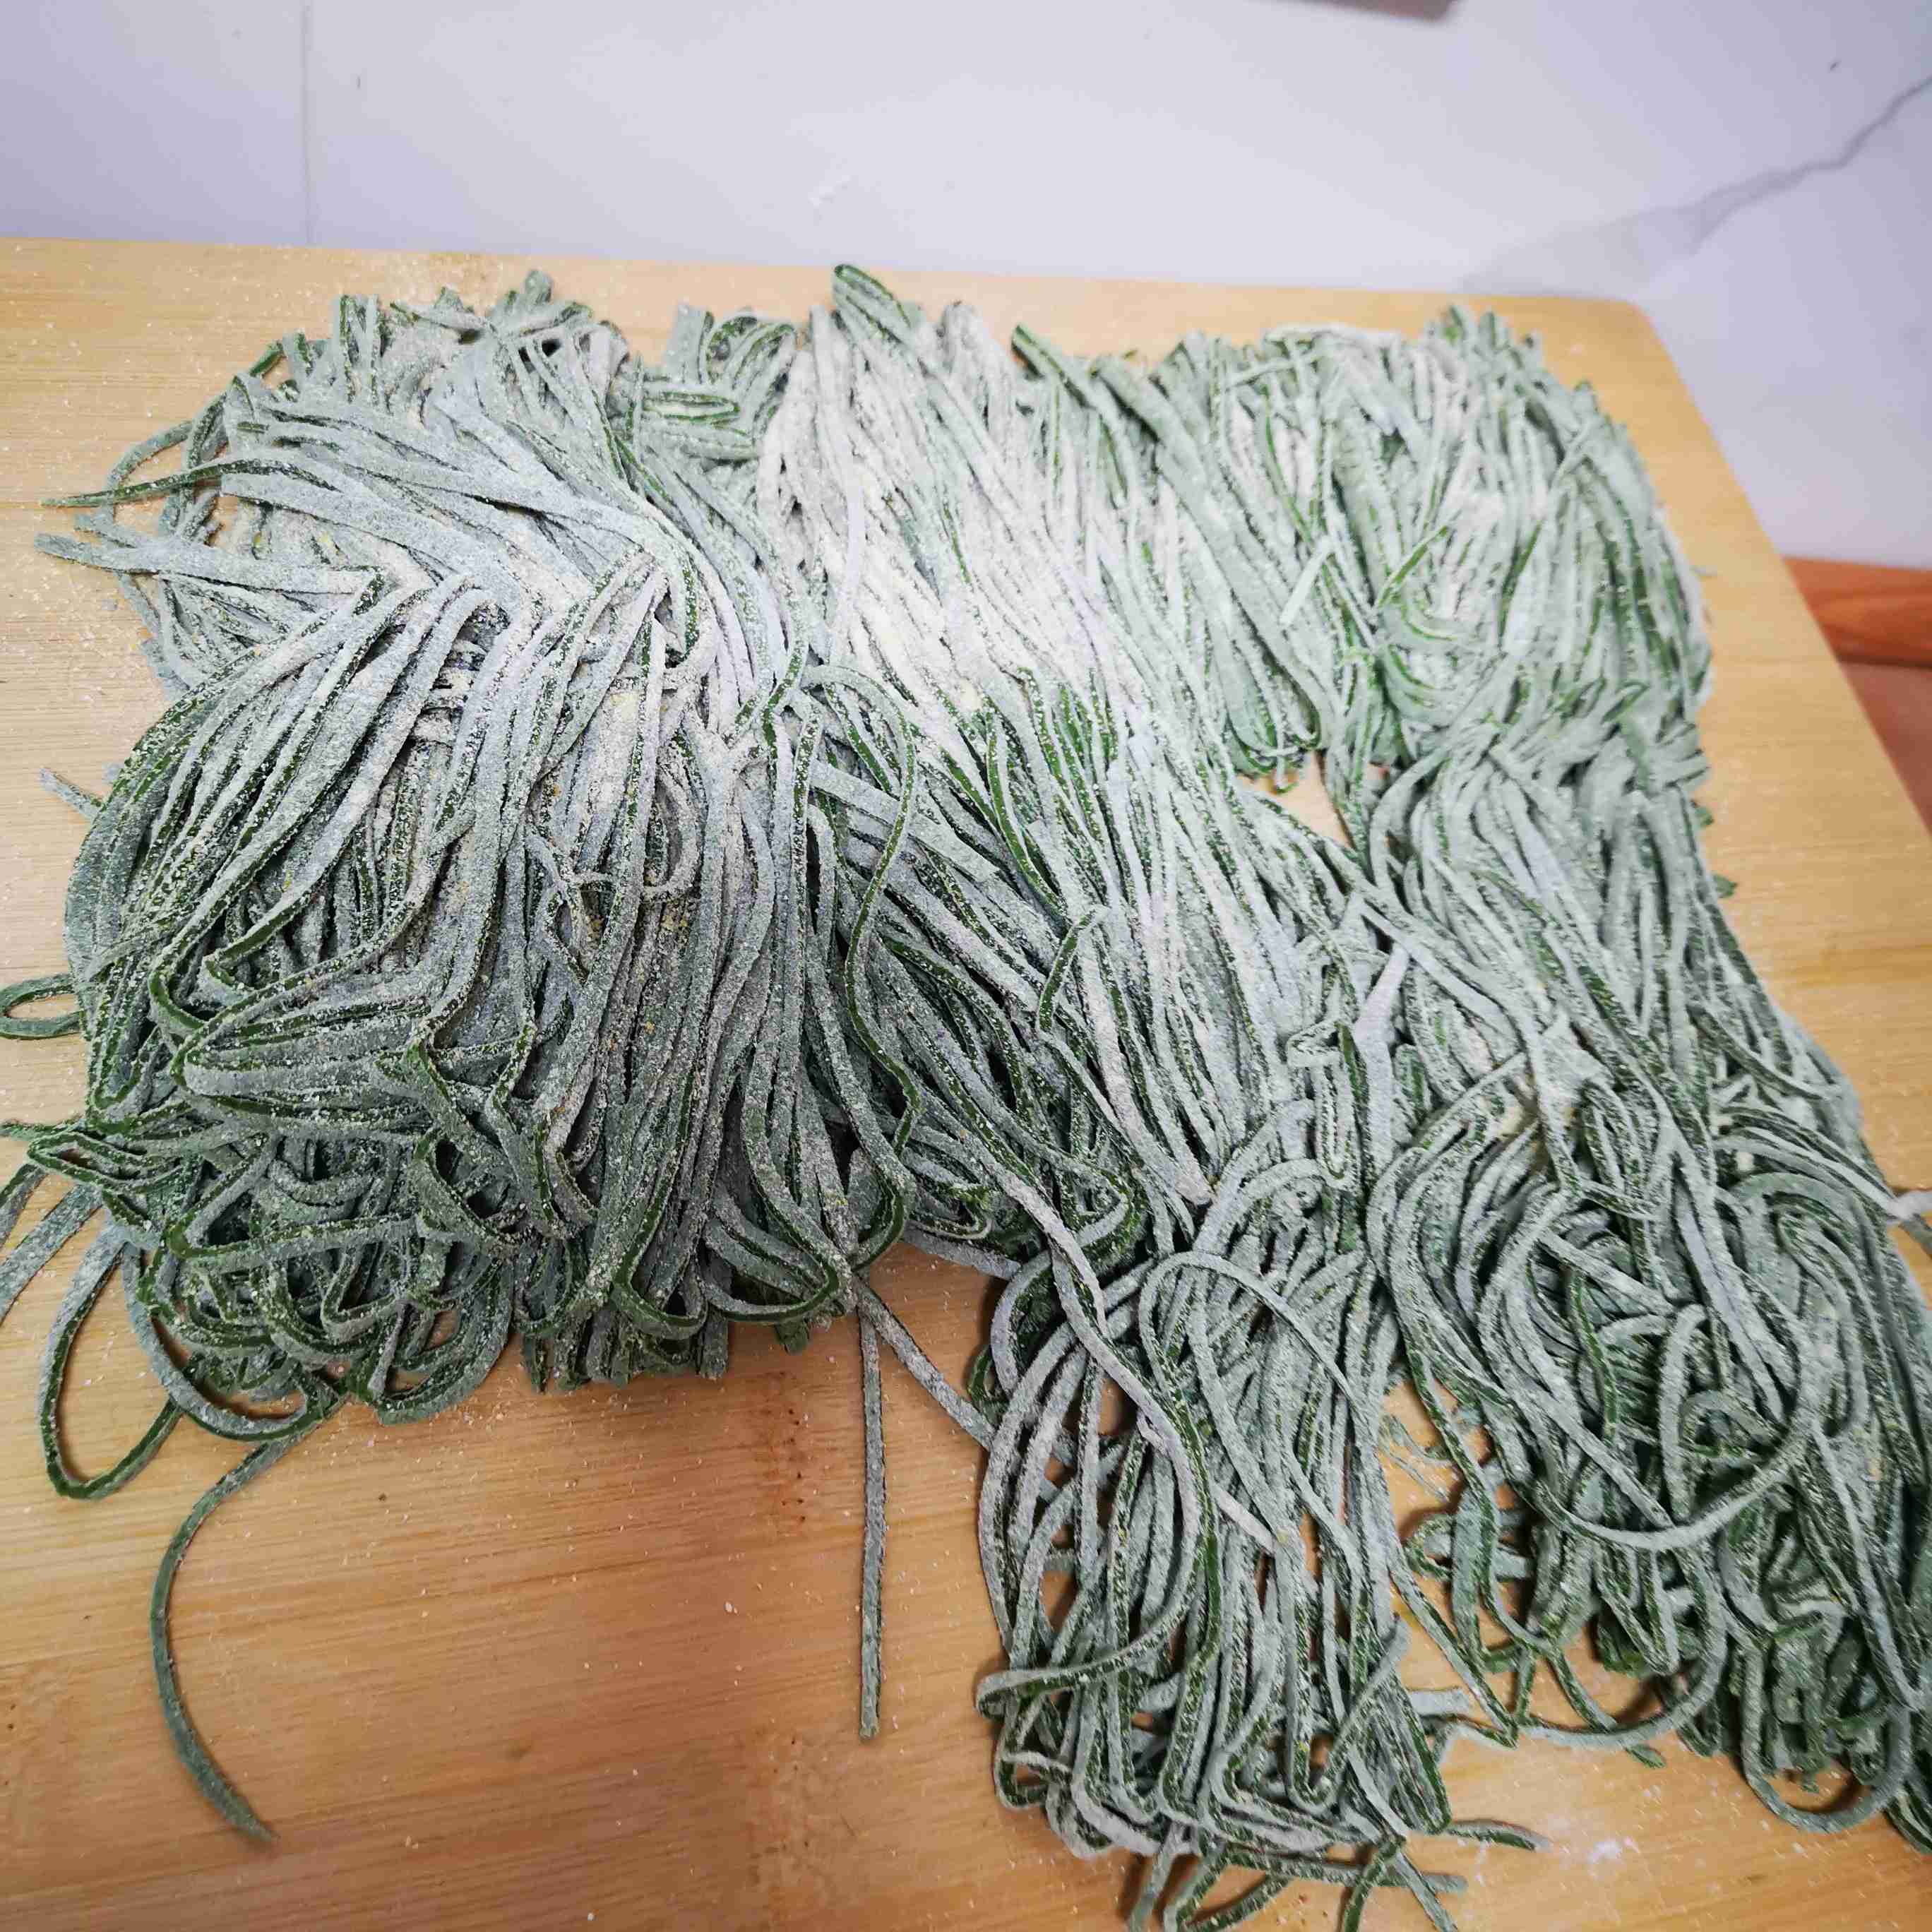 Thorn Noodles recipe